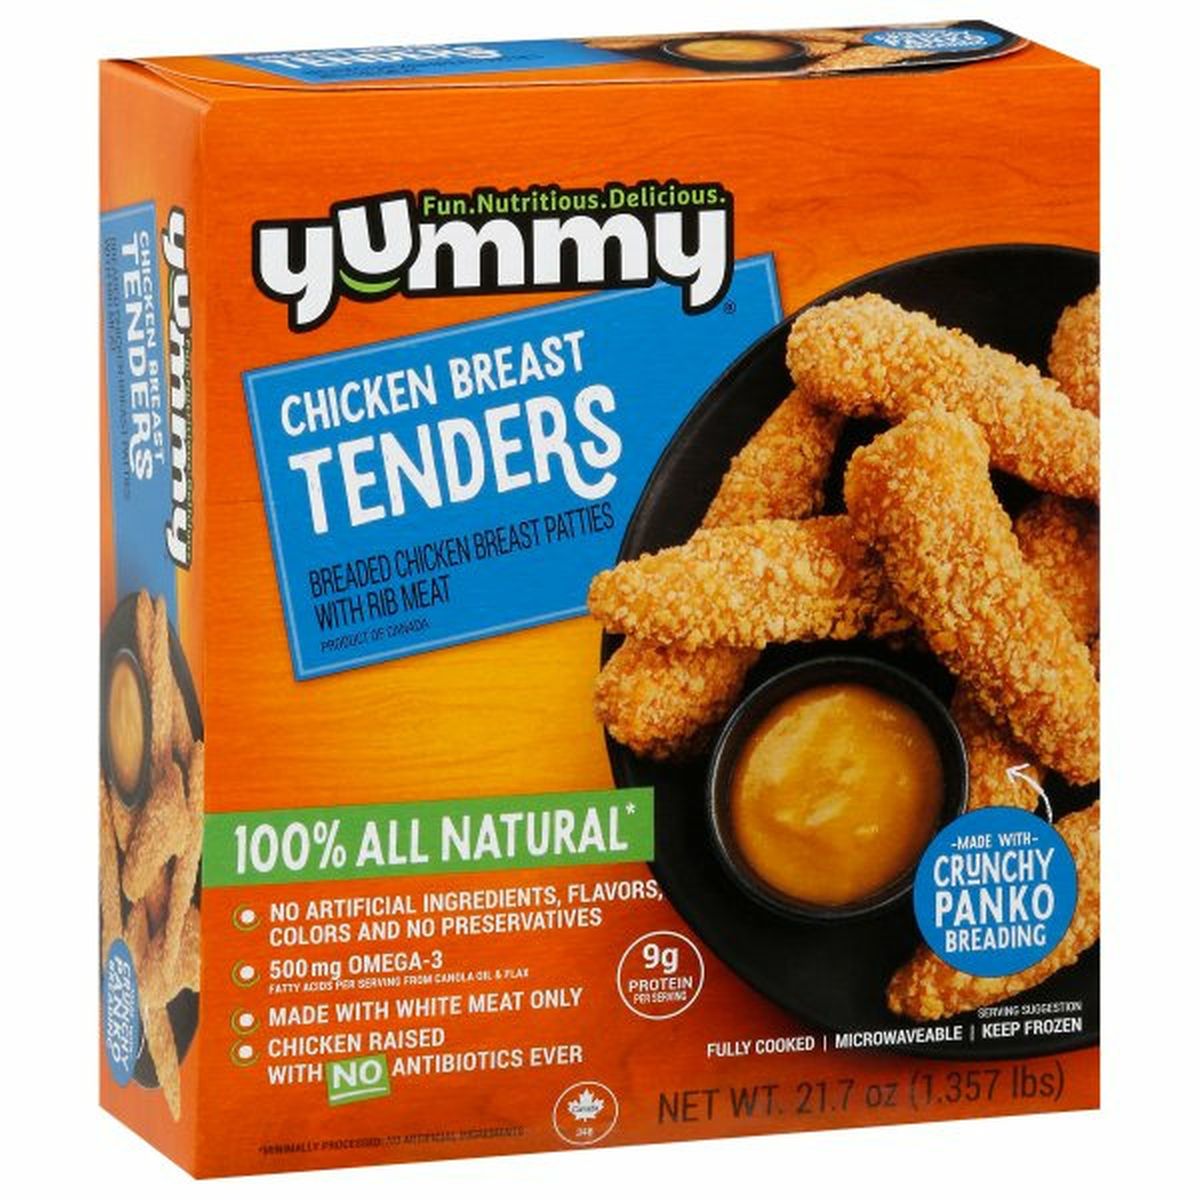 Calories in Yummy Chicken Breast Tenders